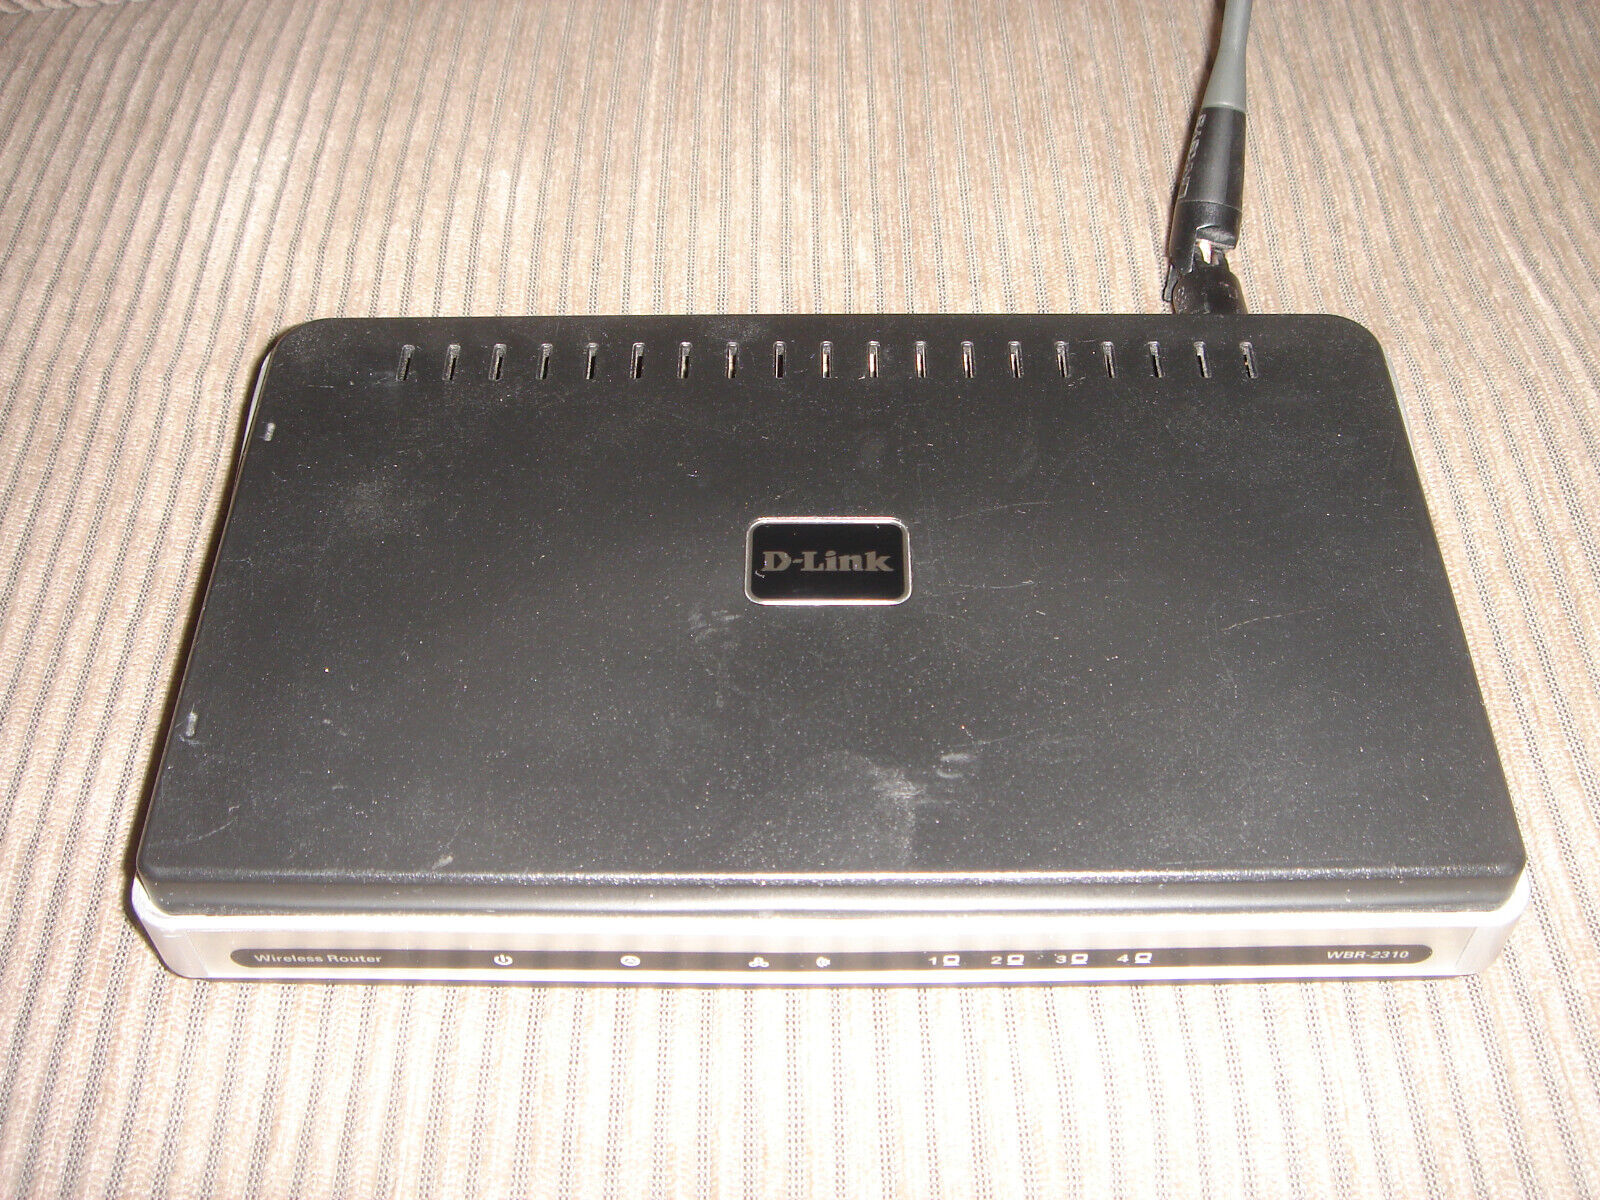 D-Link Wireless Wi-Fi Router WBR-2310 including power cord and ethernet cable